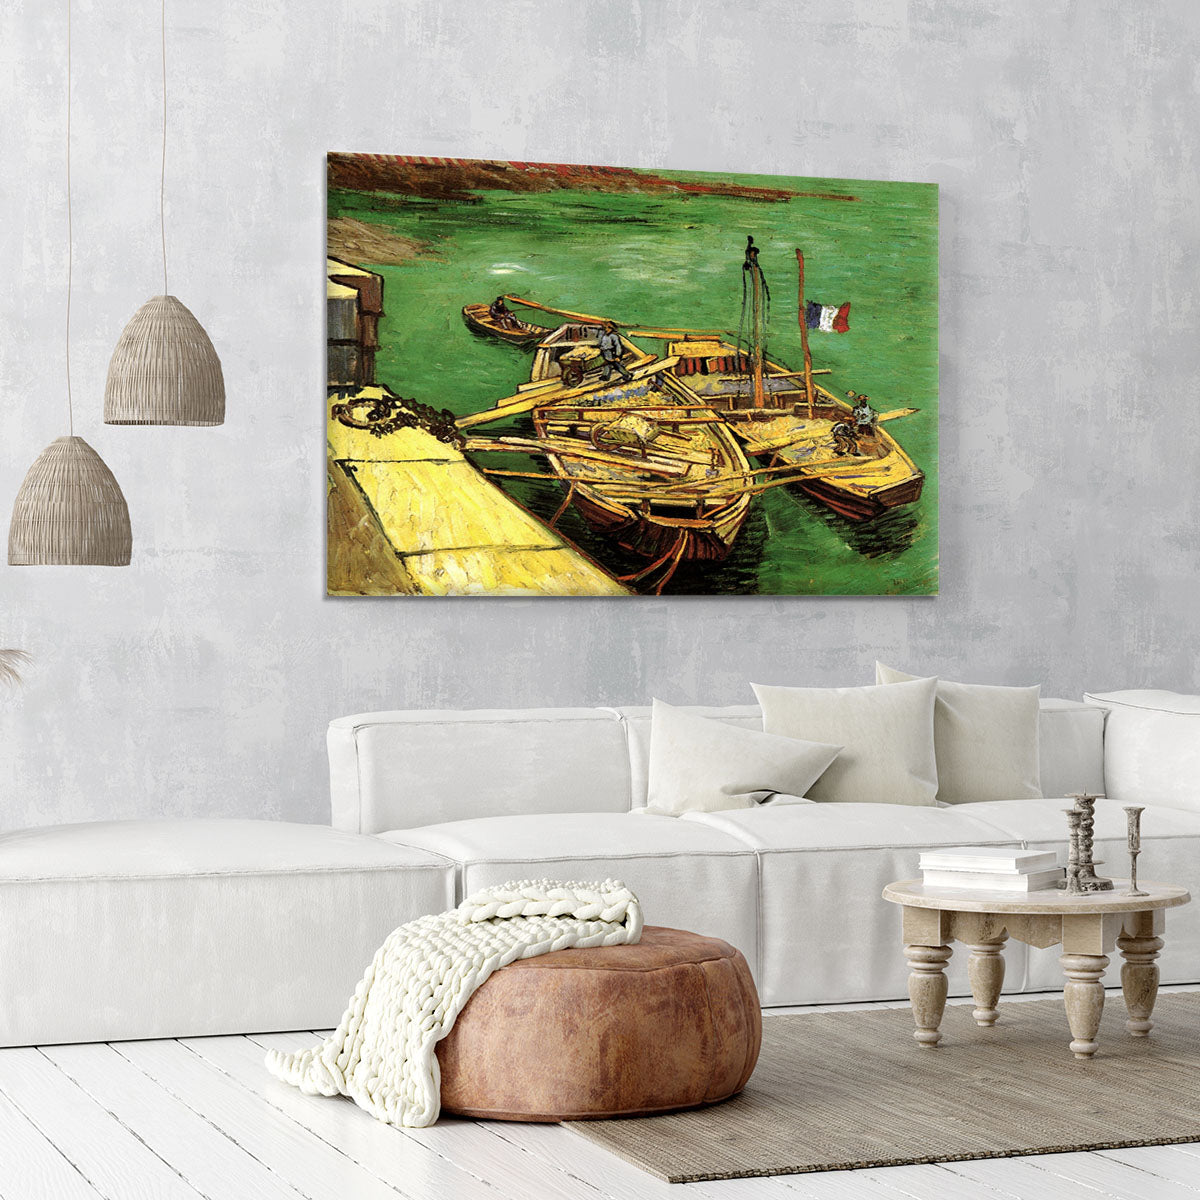 Quay with Men Unloading Sand Barges by Van Gogh Canvas Print or Poster - Canvas Art Rocks - 6